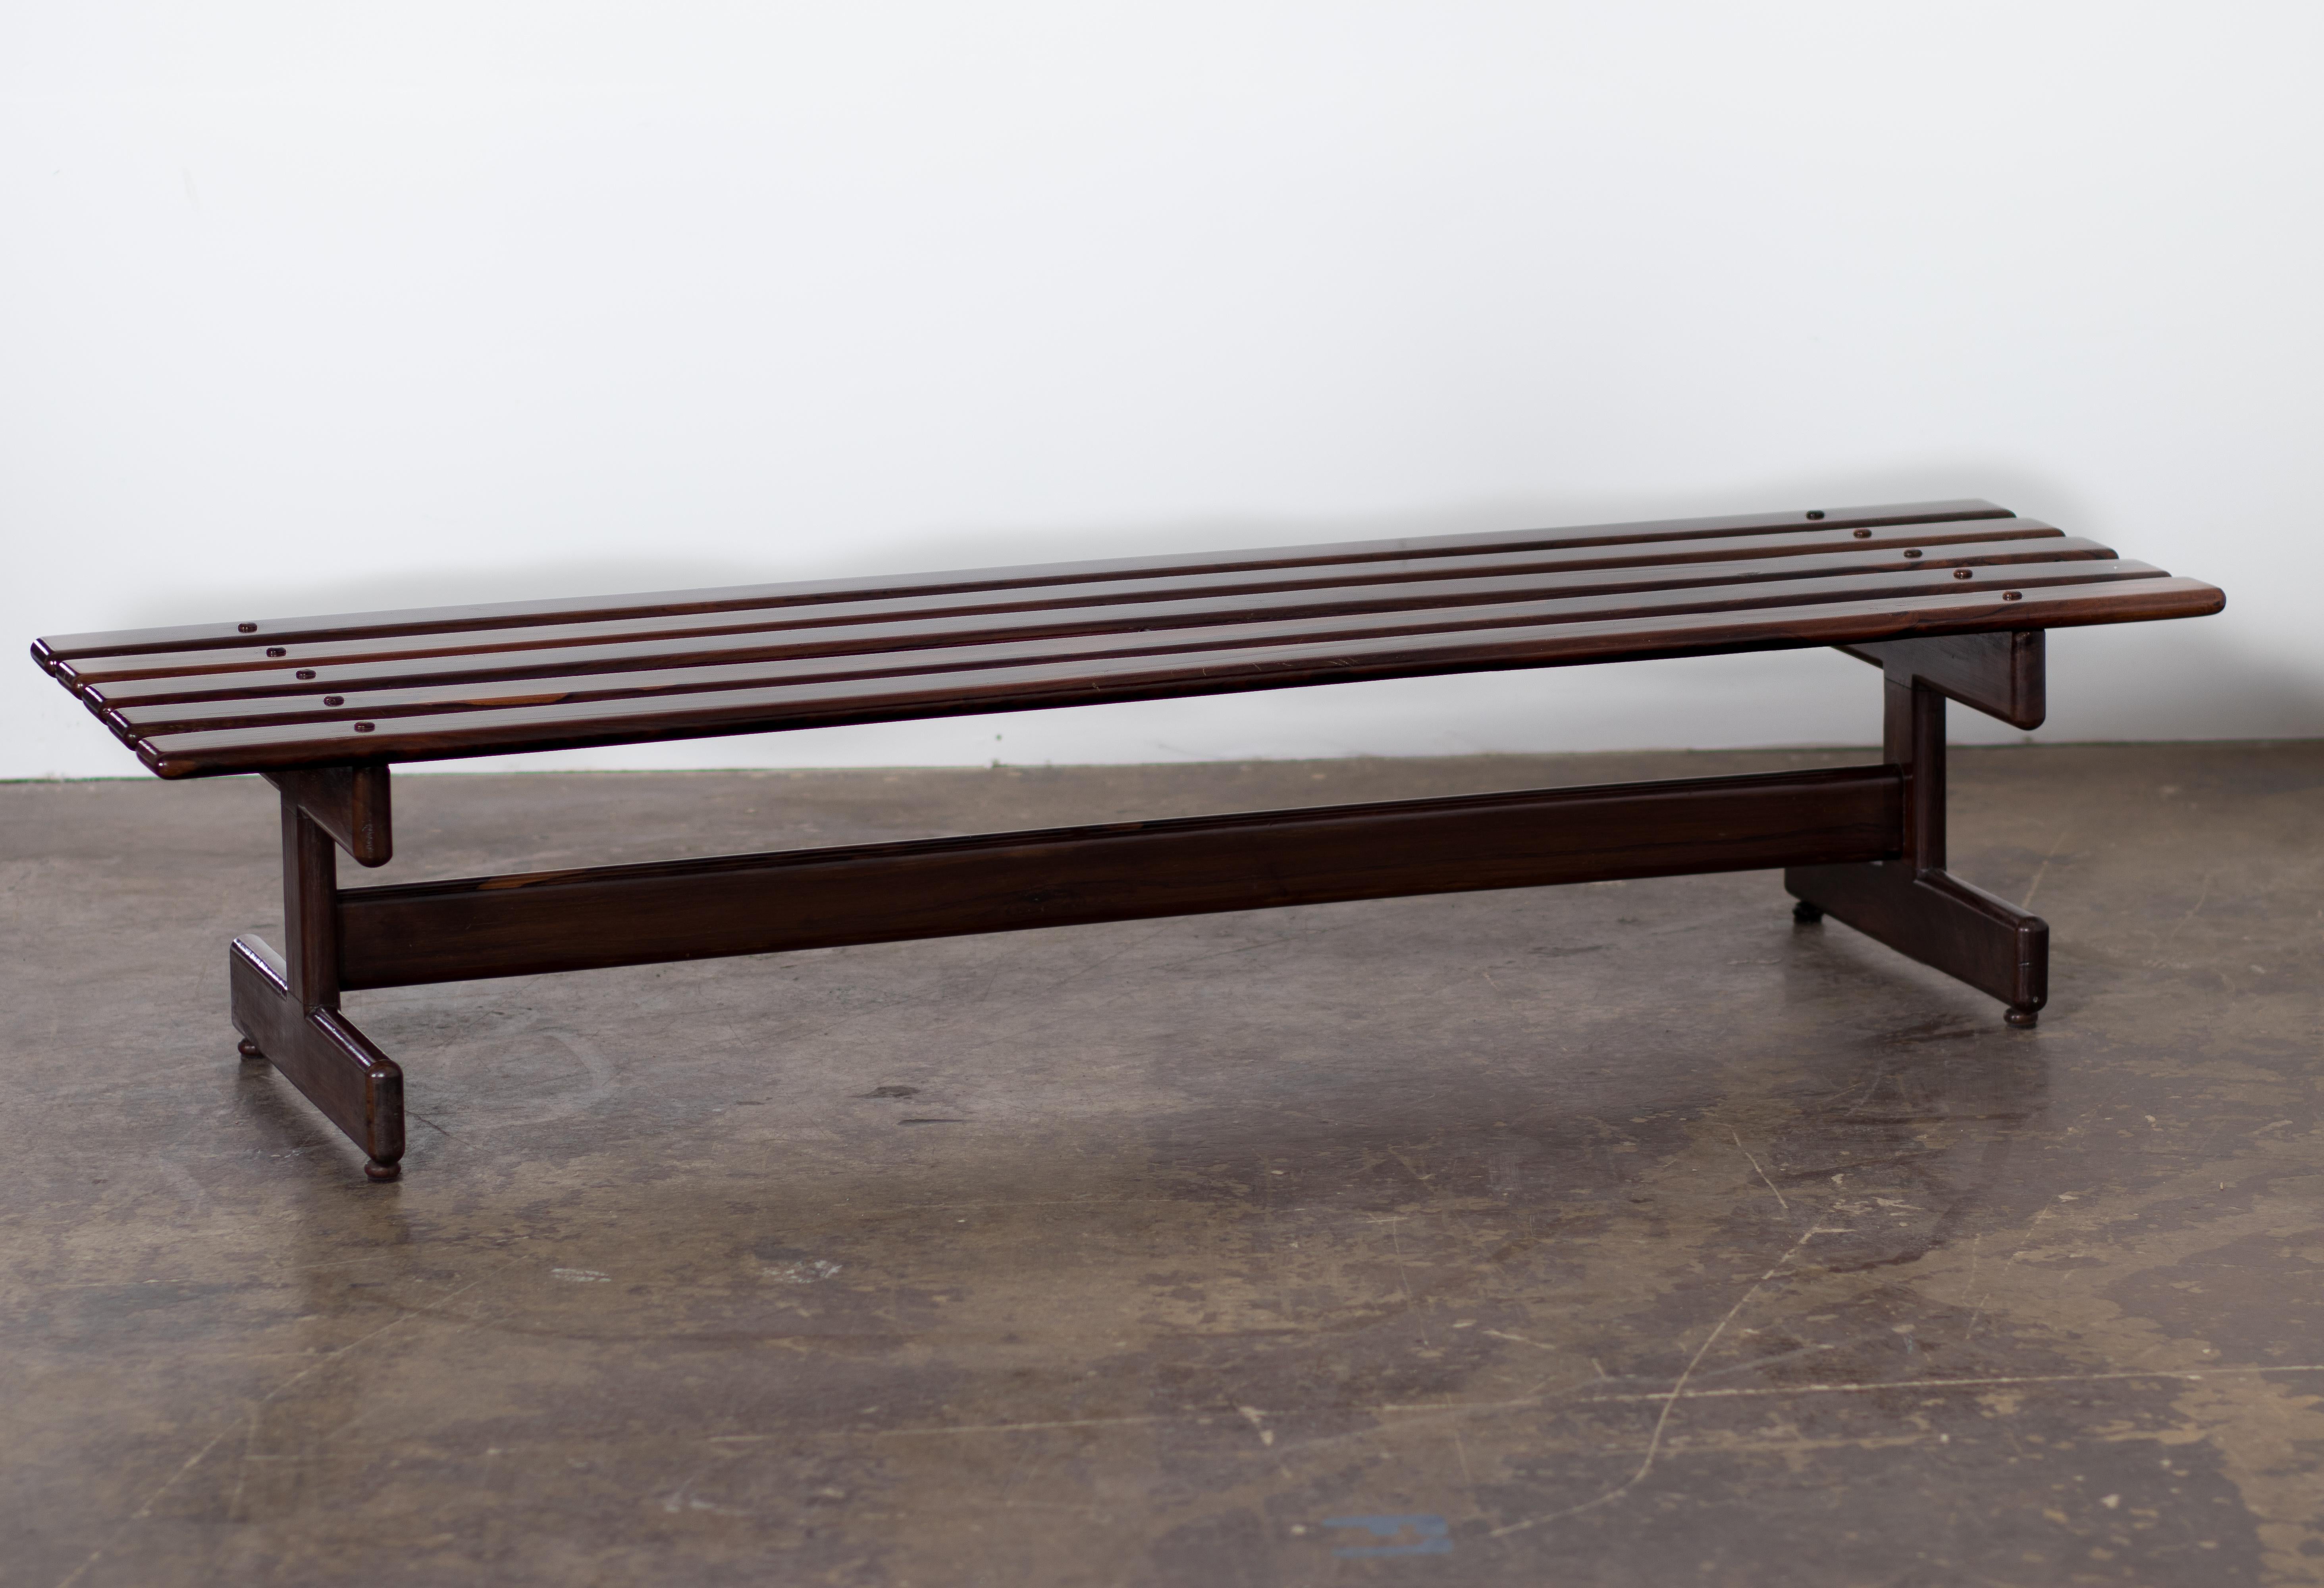 Cantù Móveis e Interiores LTDA produced this gorgeous bench in the 1960s. It consists of a very well-constructed piece in solid Rosewood, with slats rhythmically positioned supported by three feet with the characteristic shape used by the company in